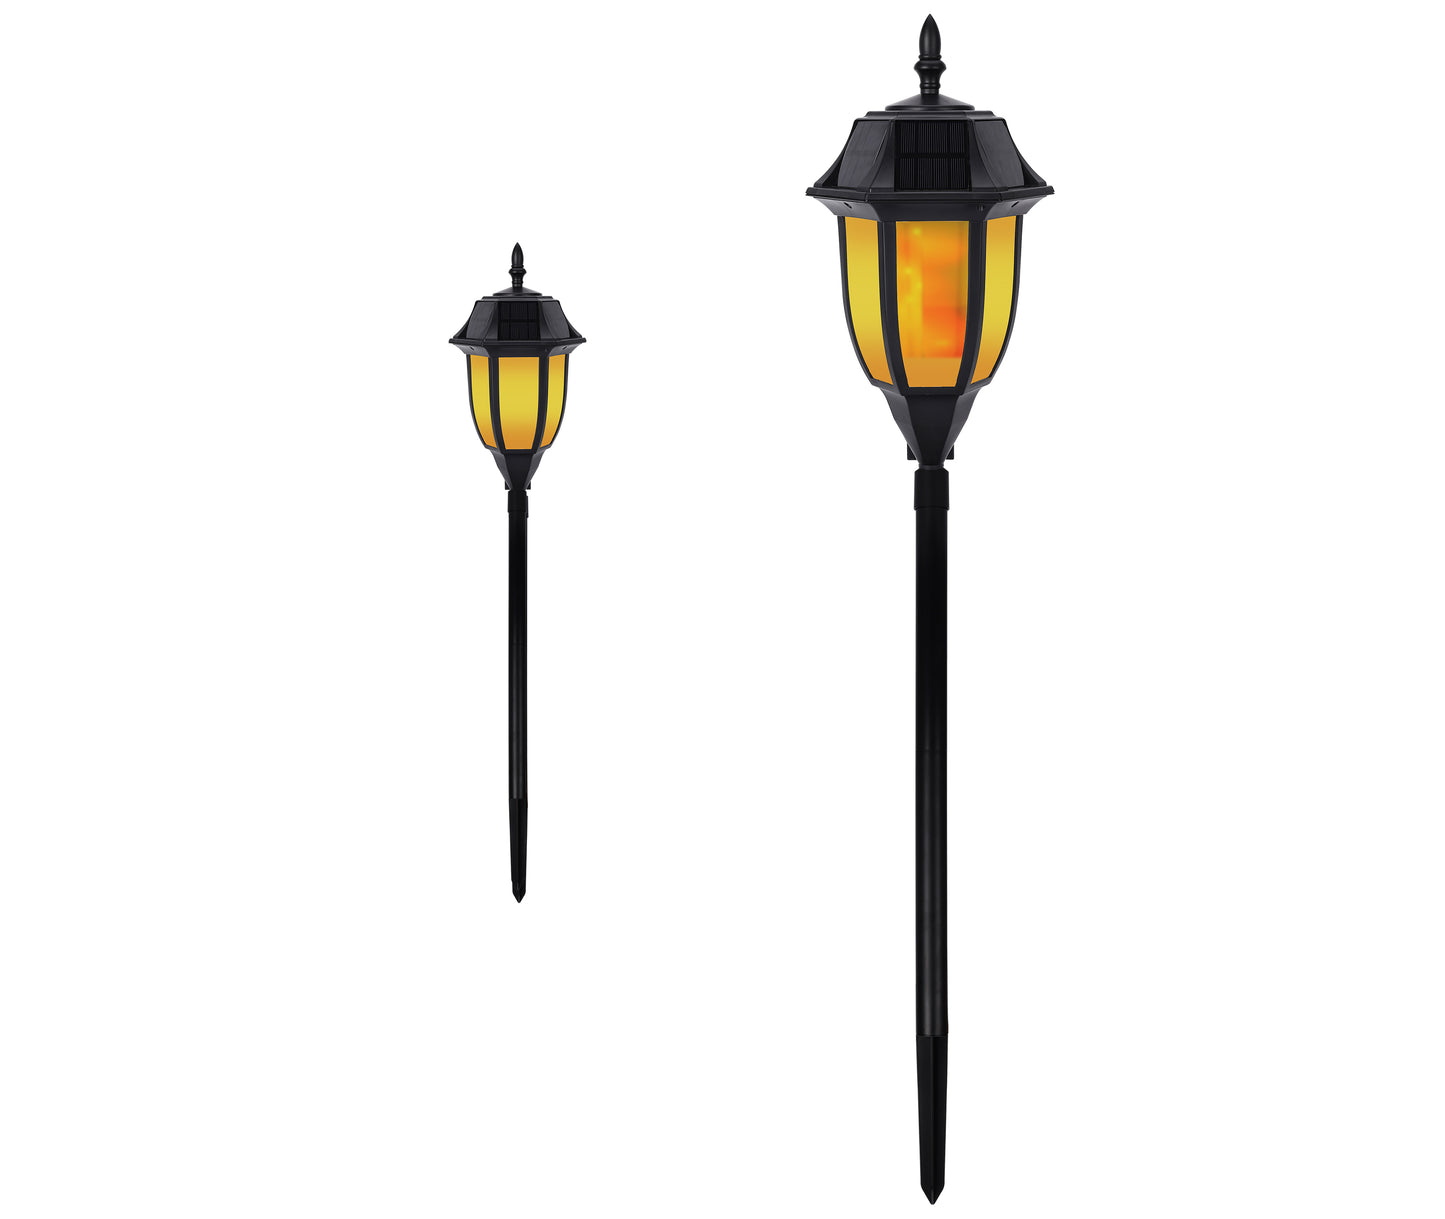 Solar Classic Pathway Light (Flame Effect)